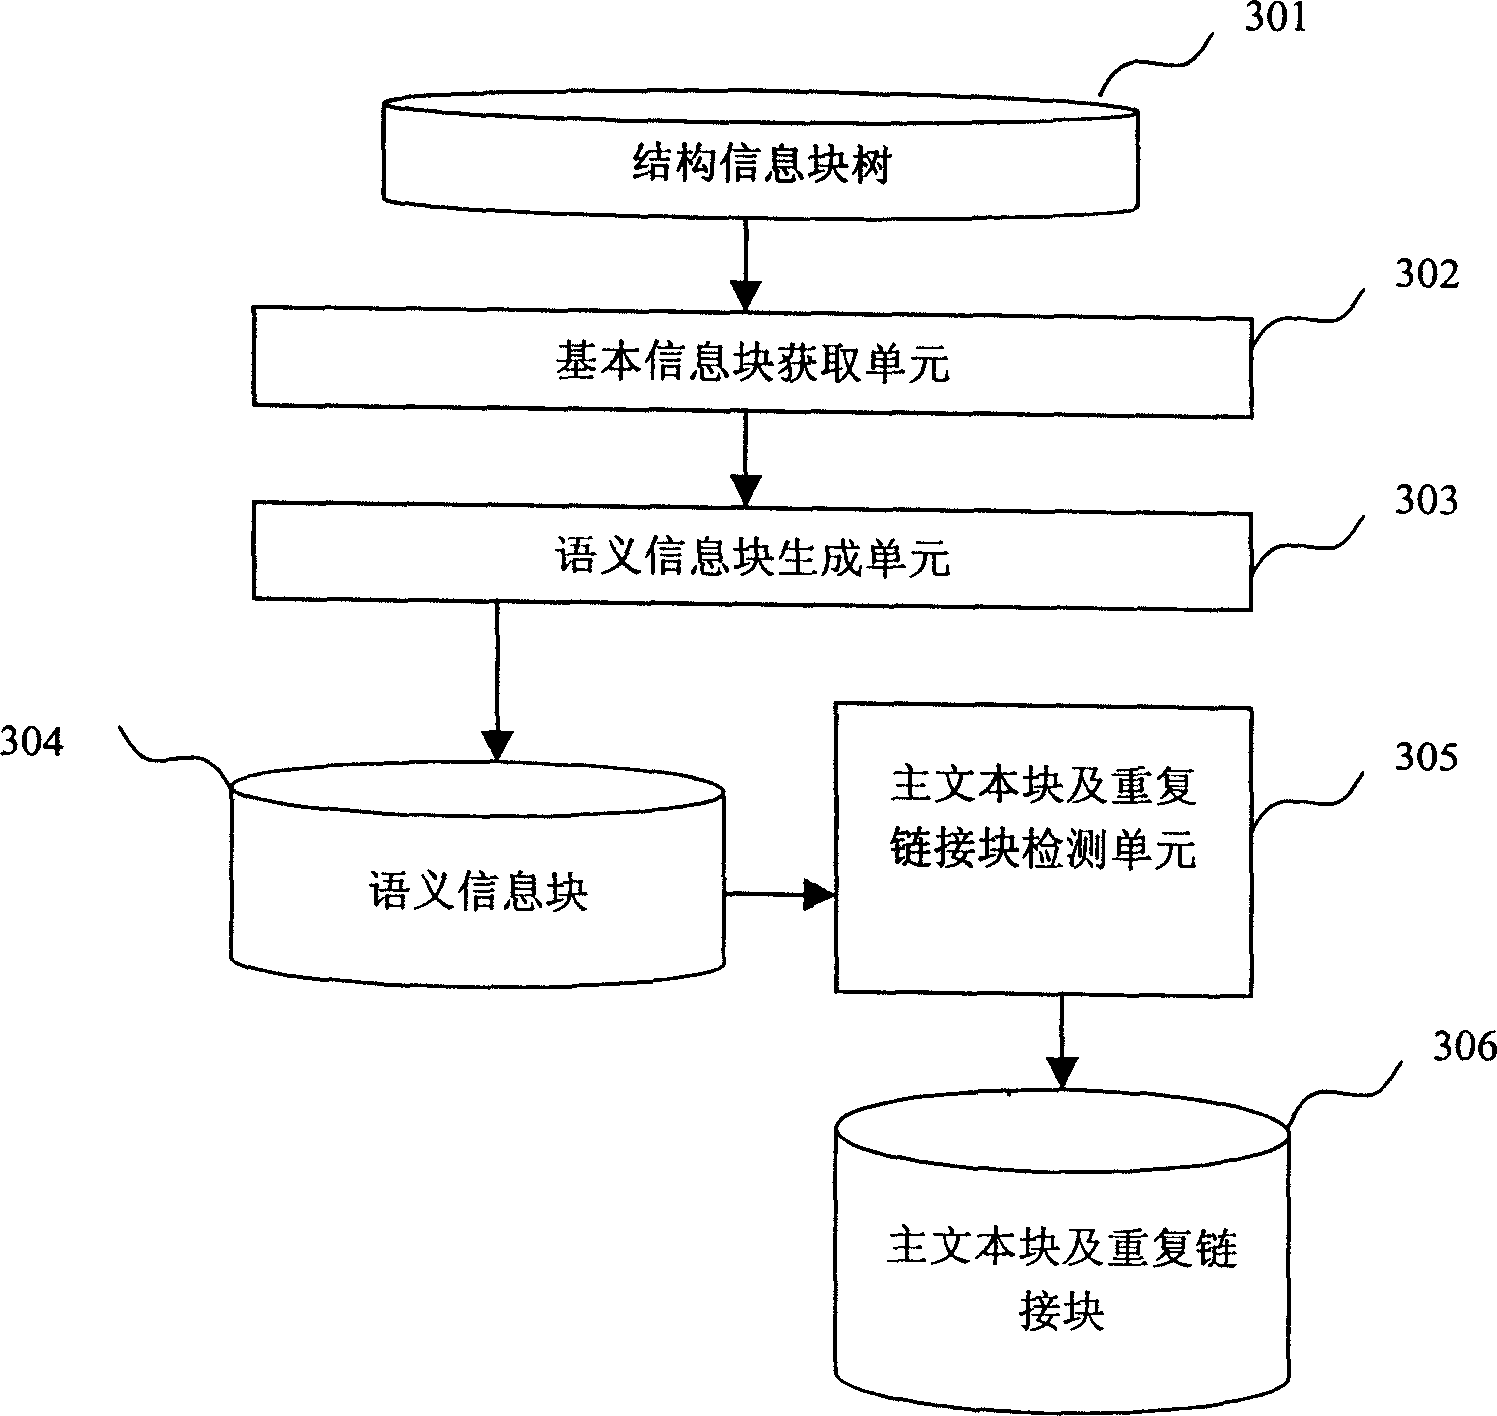 Web page information block extracting method and apparatus